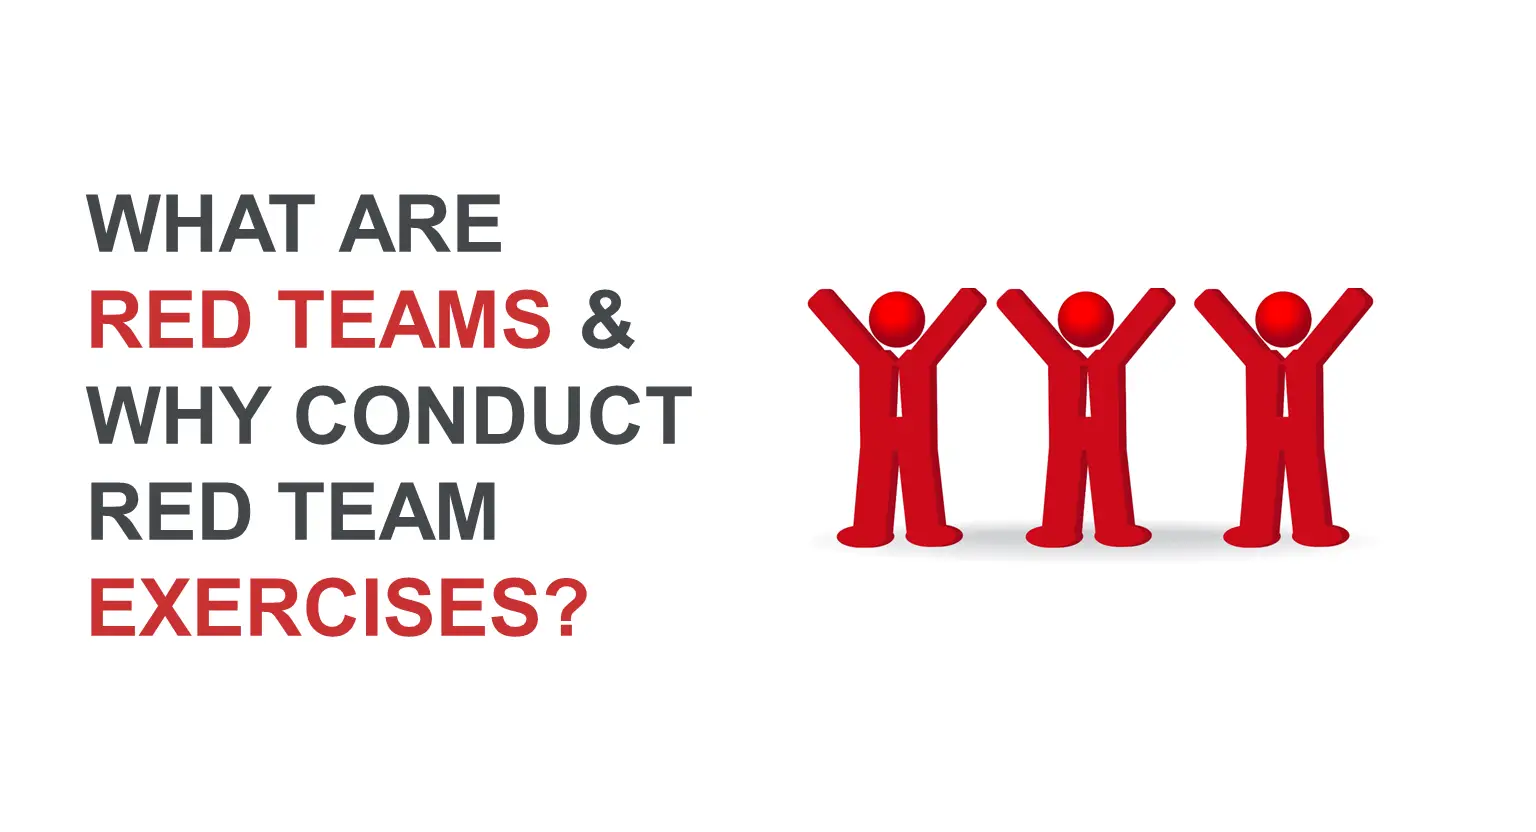 What Are Red Teams And Why Conduct Red Team Exercises?